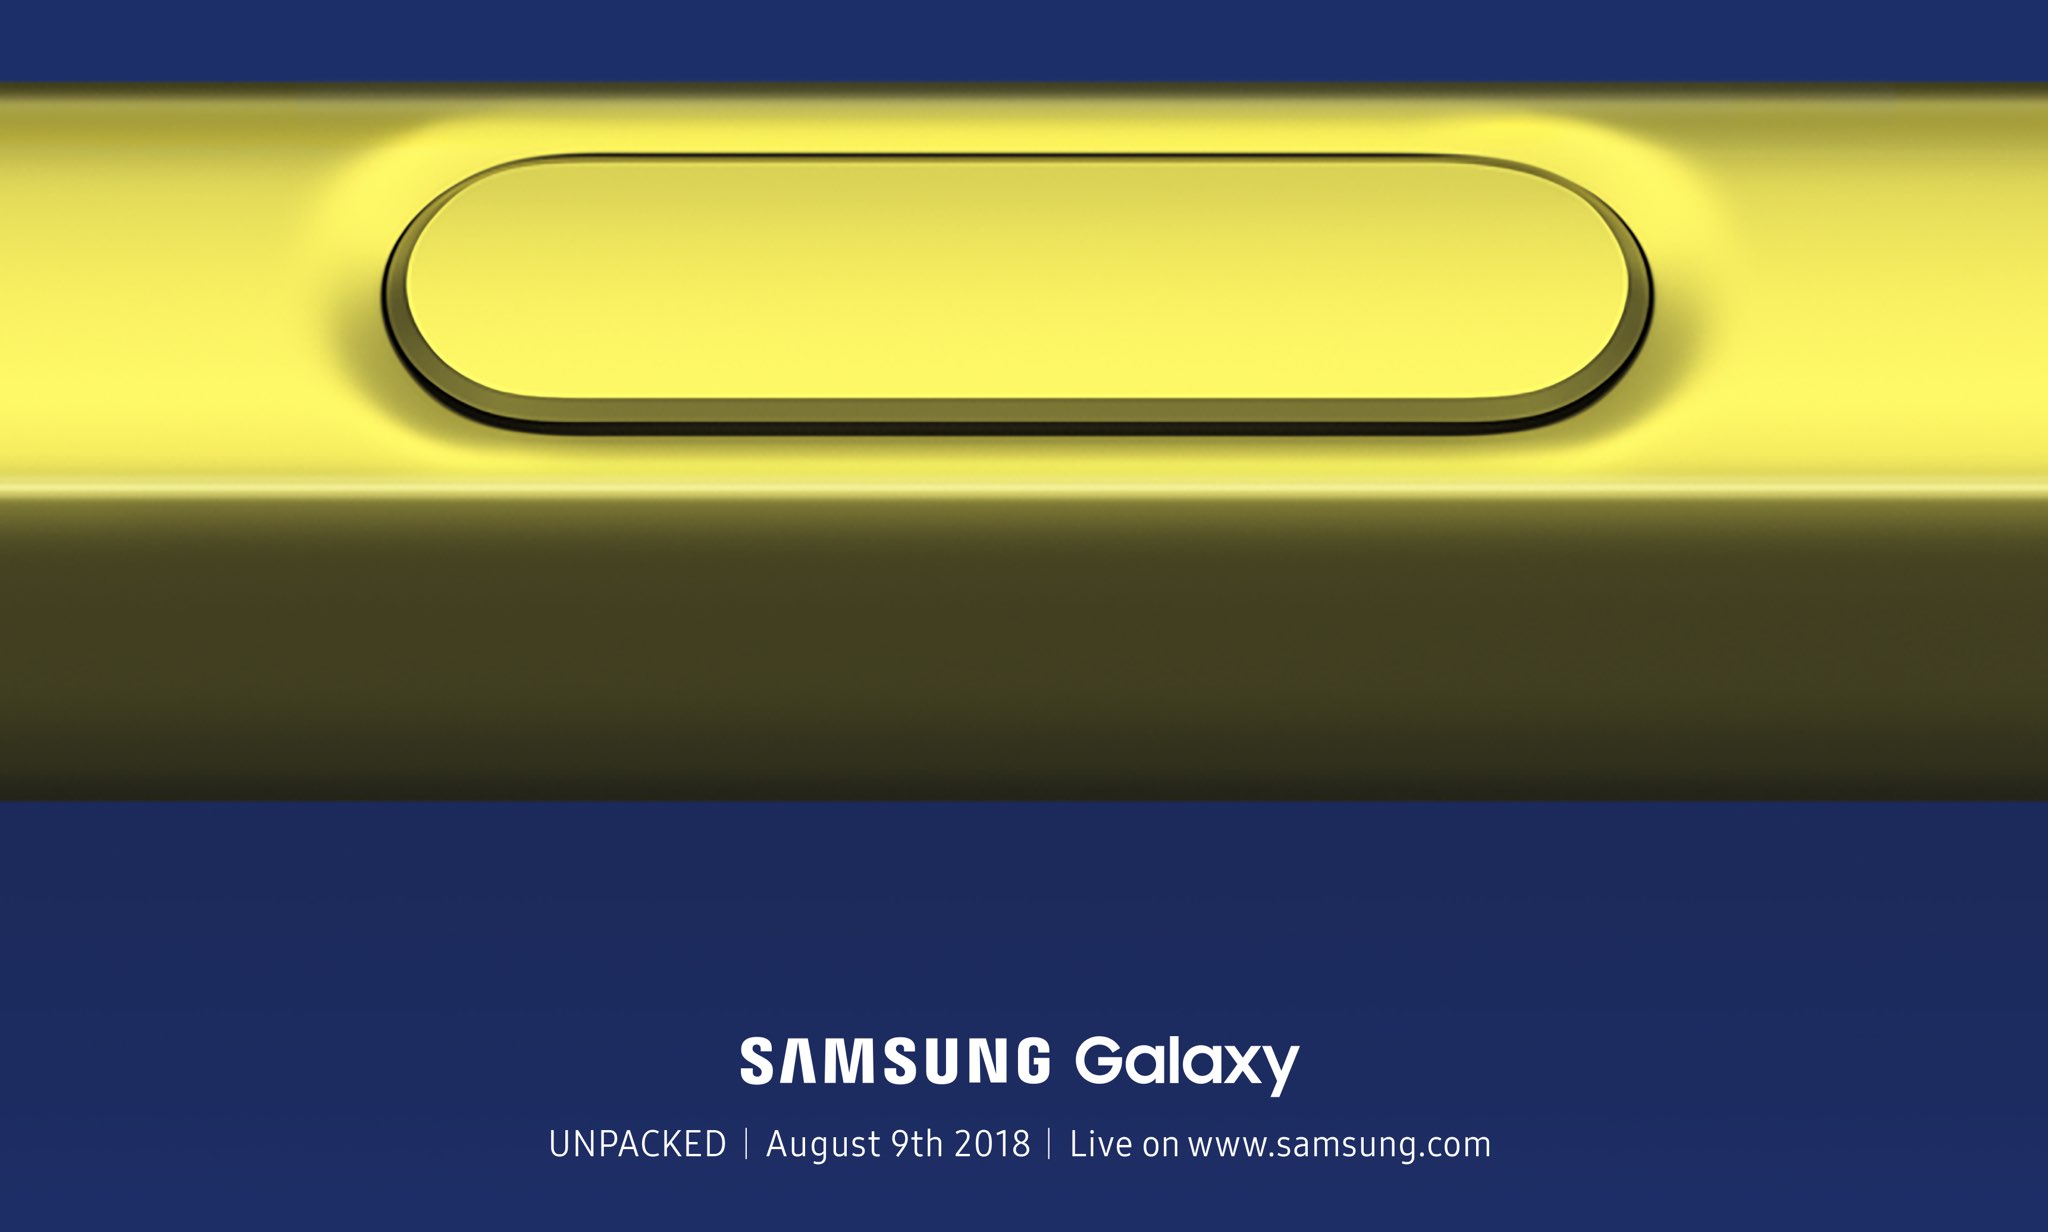 Samsung's invitation for the August 9 event